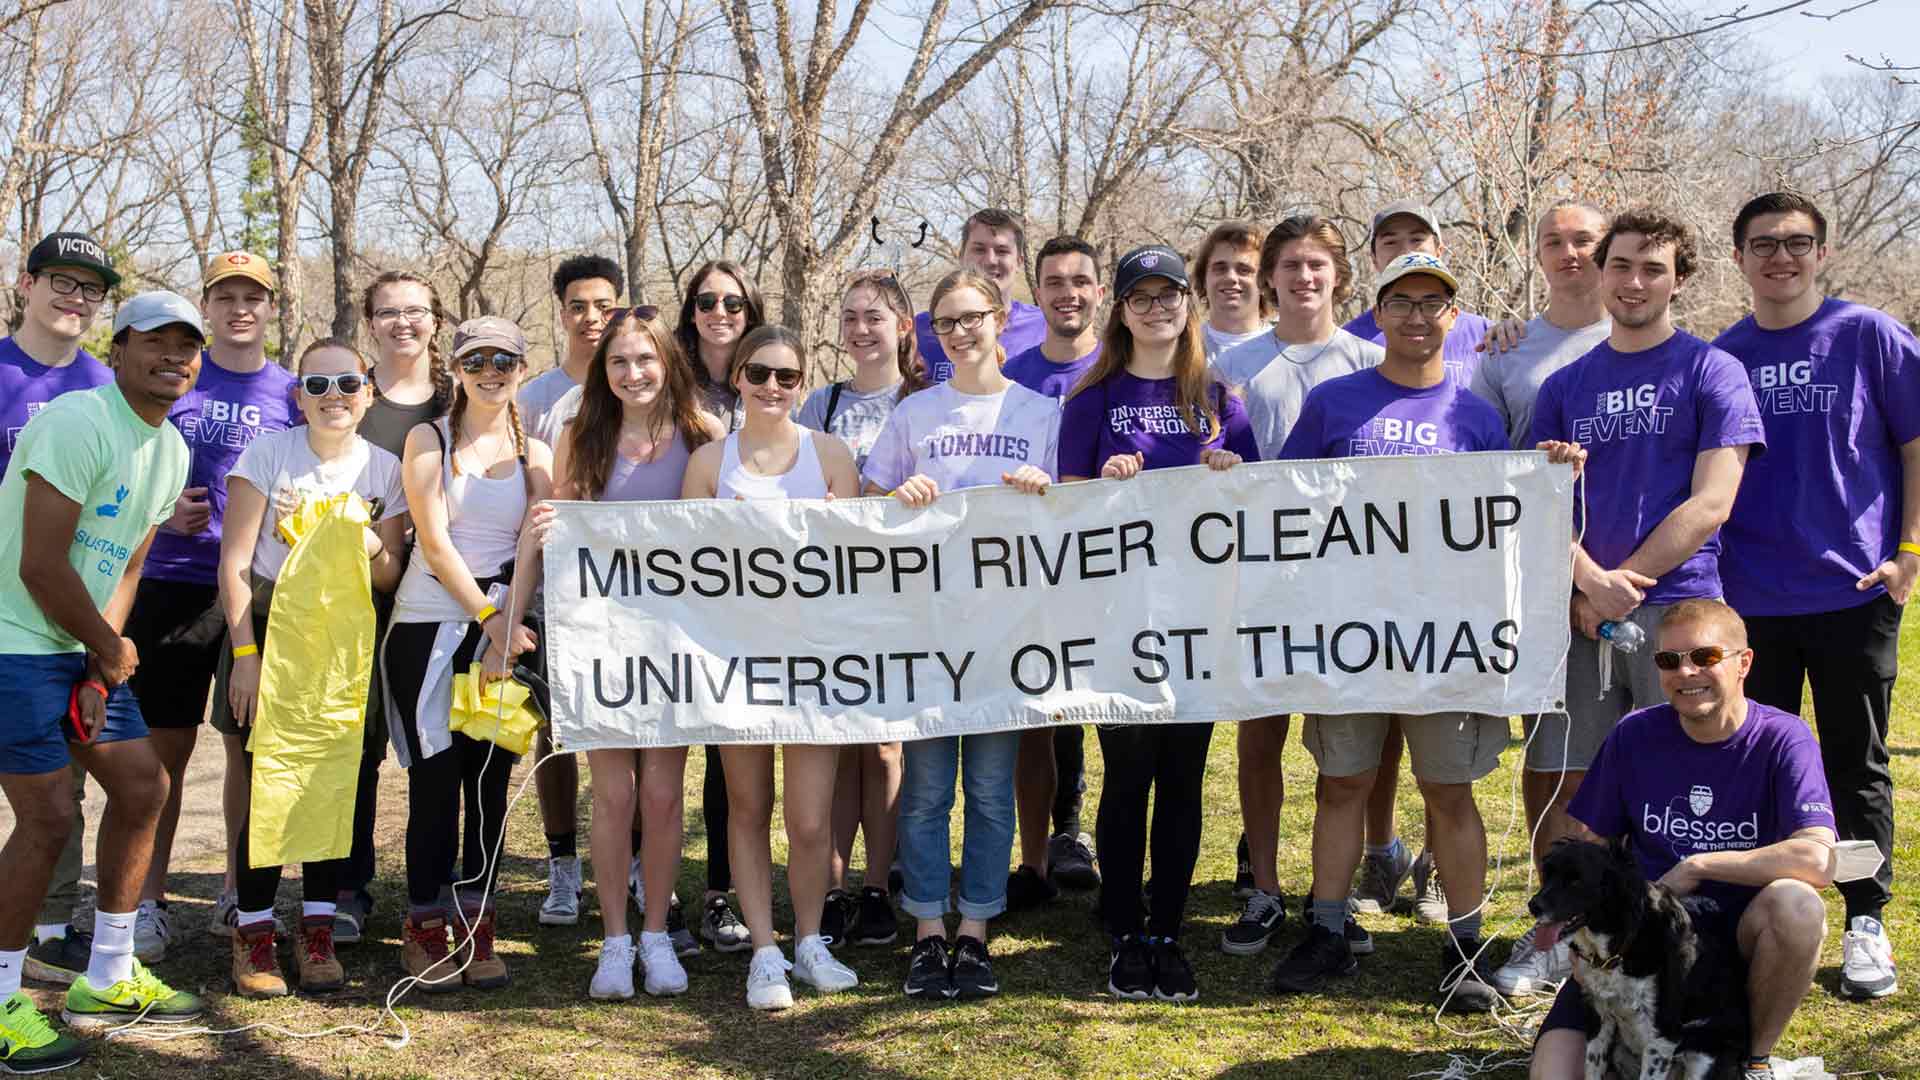 Student volunteers clean up Mississippi river